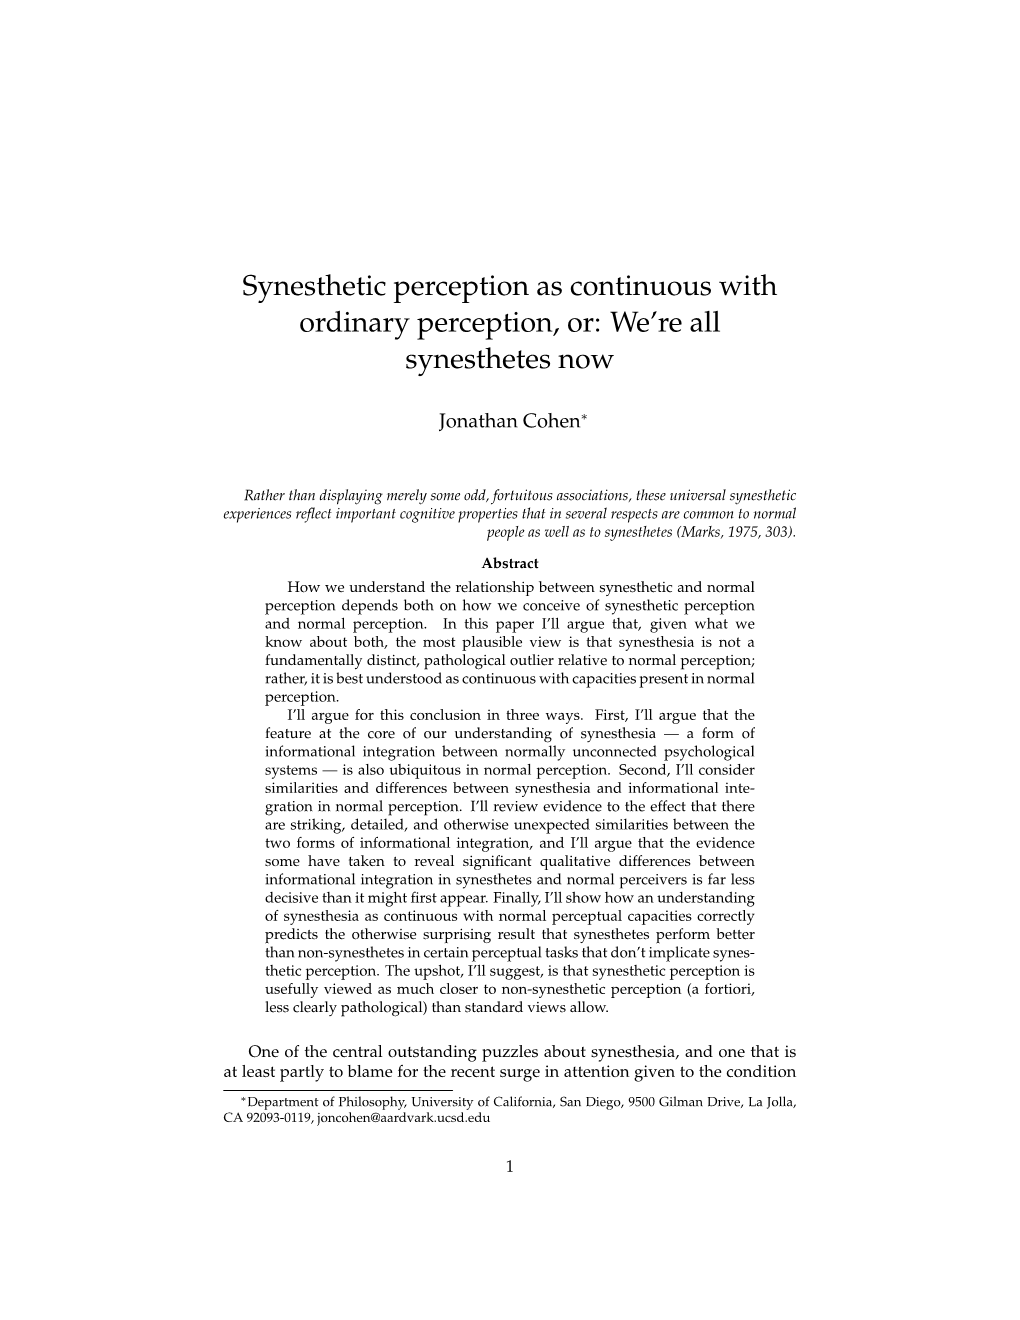 Synesthetic Perception As Continuous with Ordinary Perception, Or: We’Re All Synesthetes Now